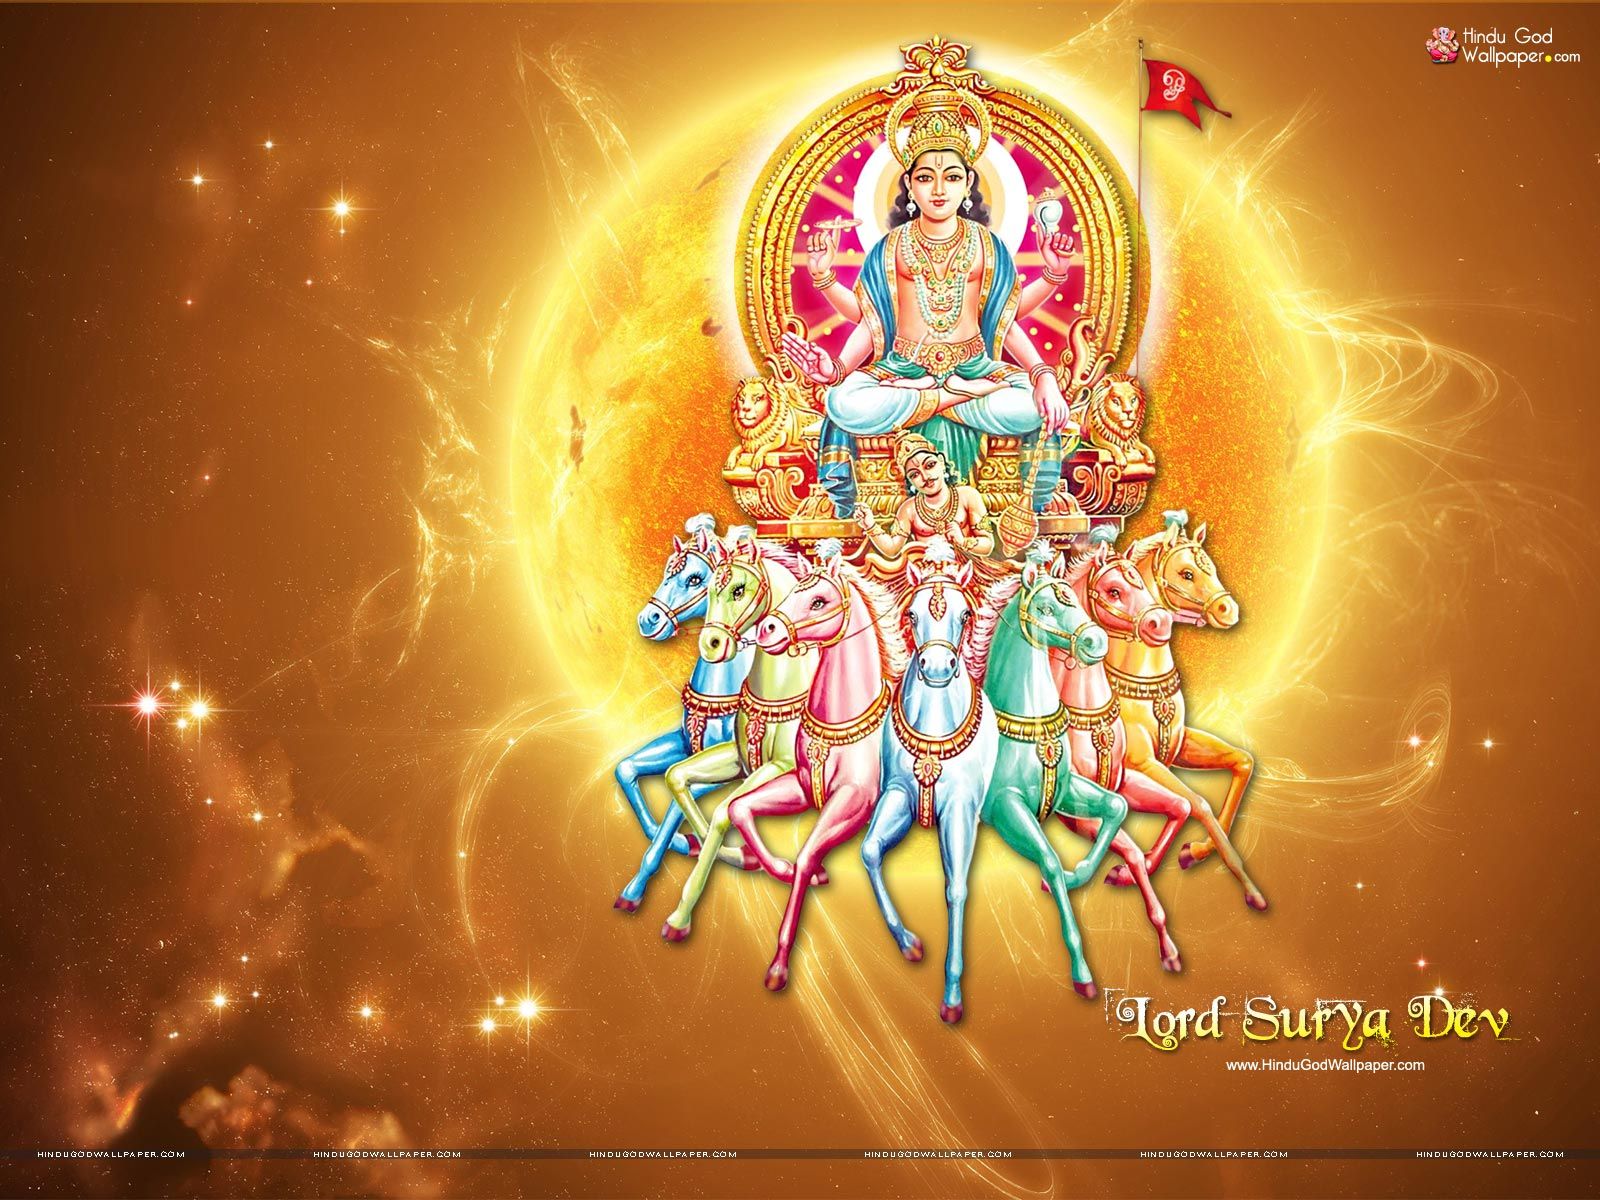 Free Lord Surya Dev Wallpaper download for desktop with HD full